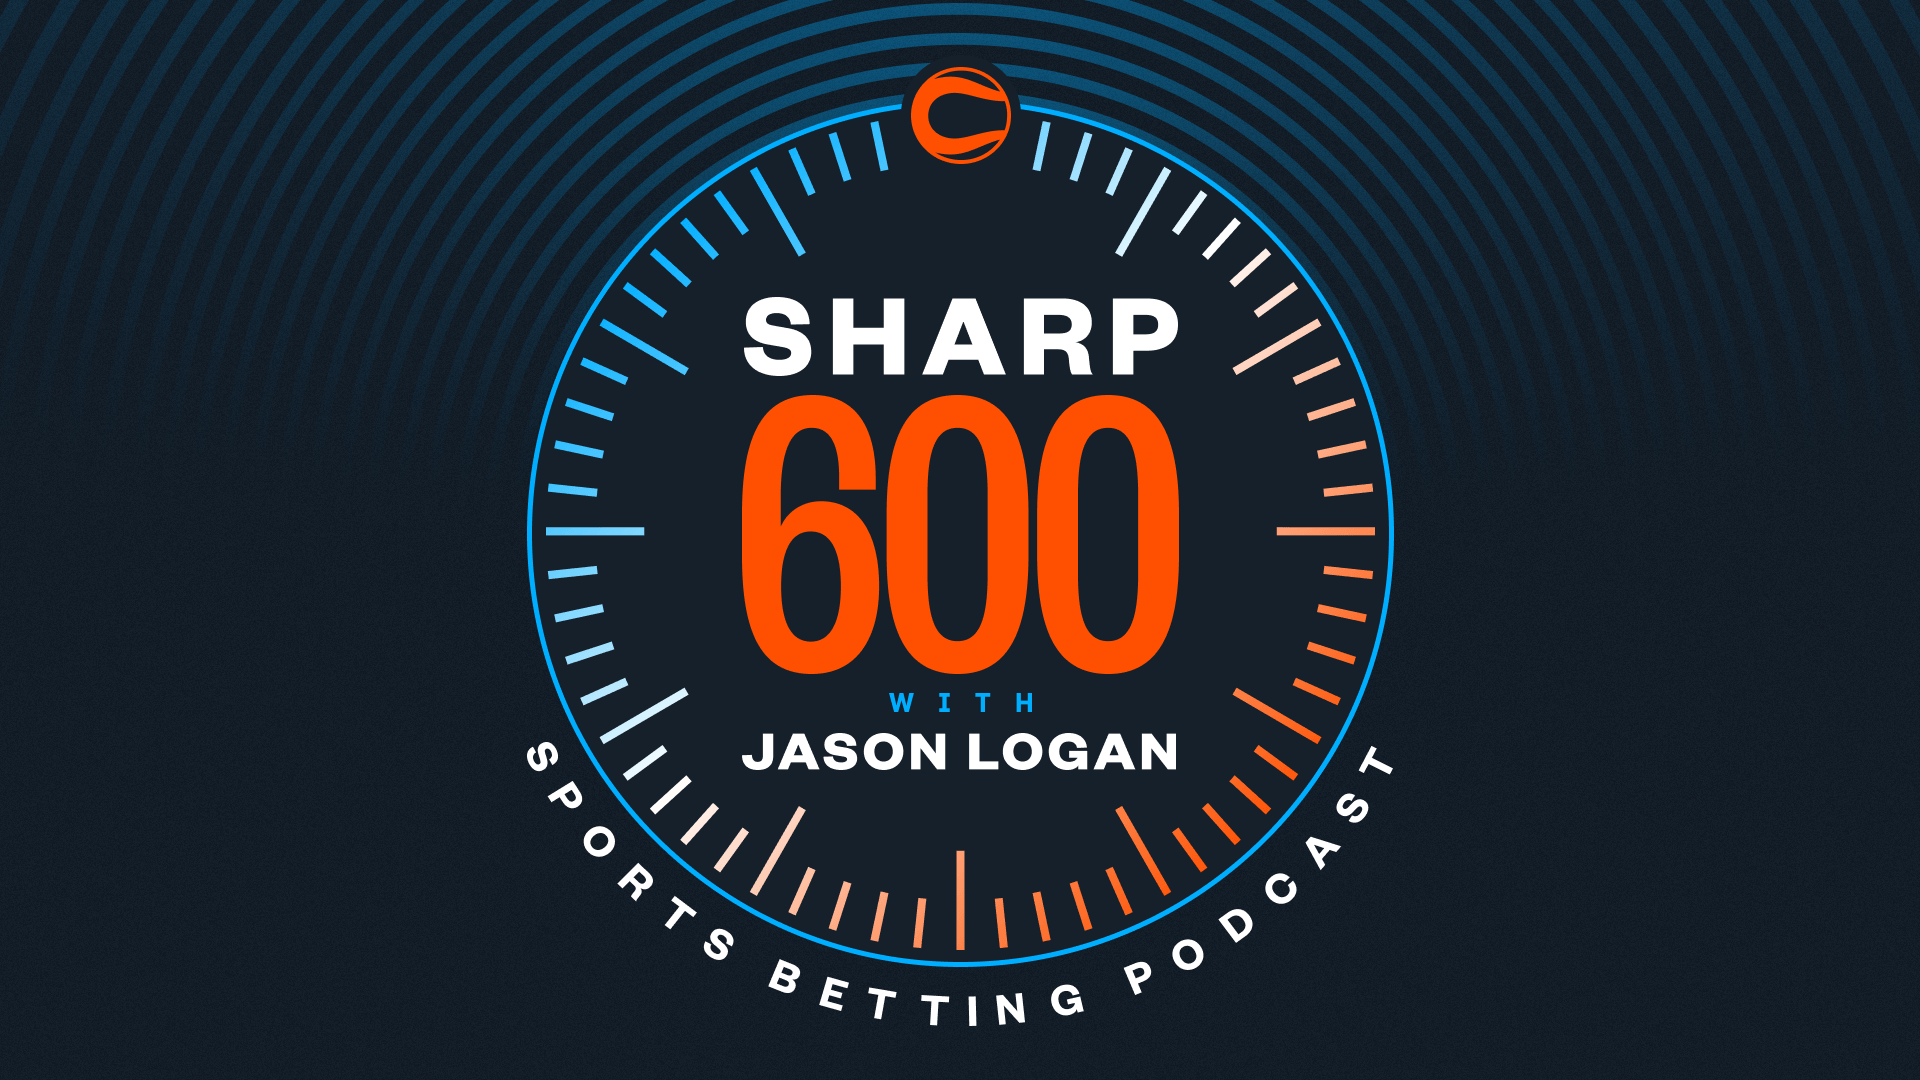 How To Bet - The Sharp 600 Podcast: Watch/Listen Every Wednesday!